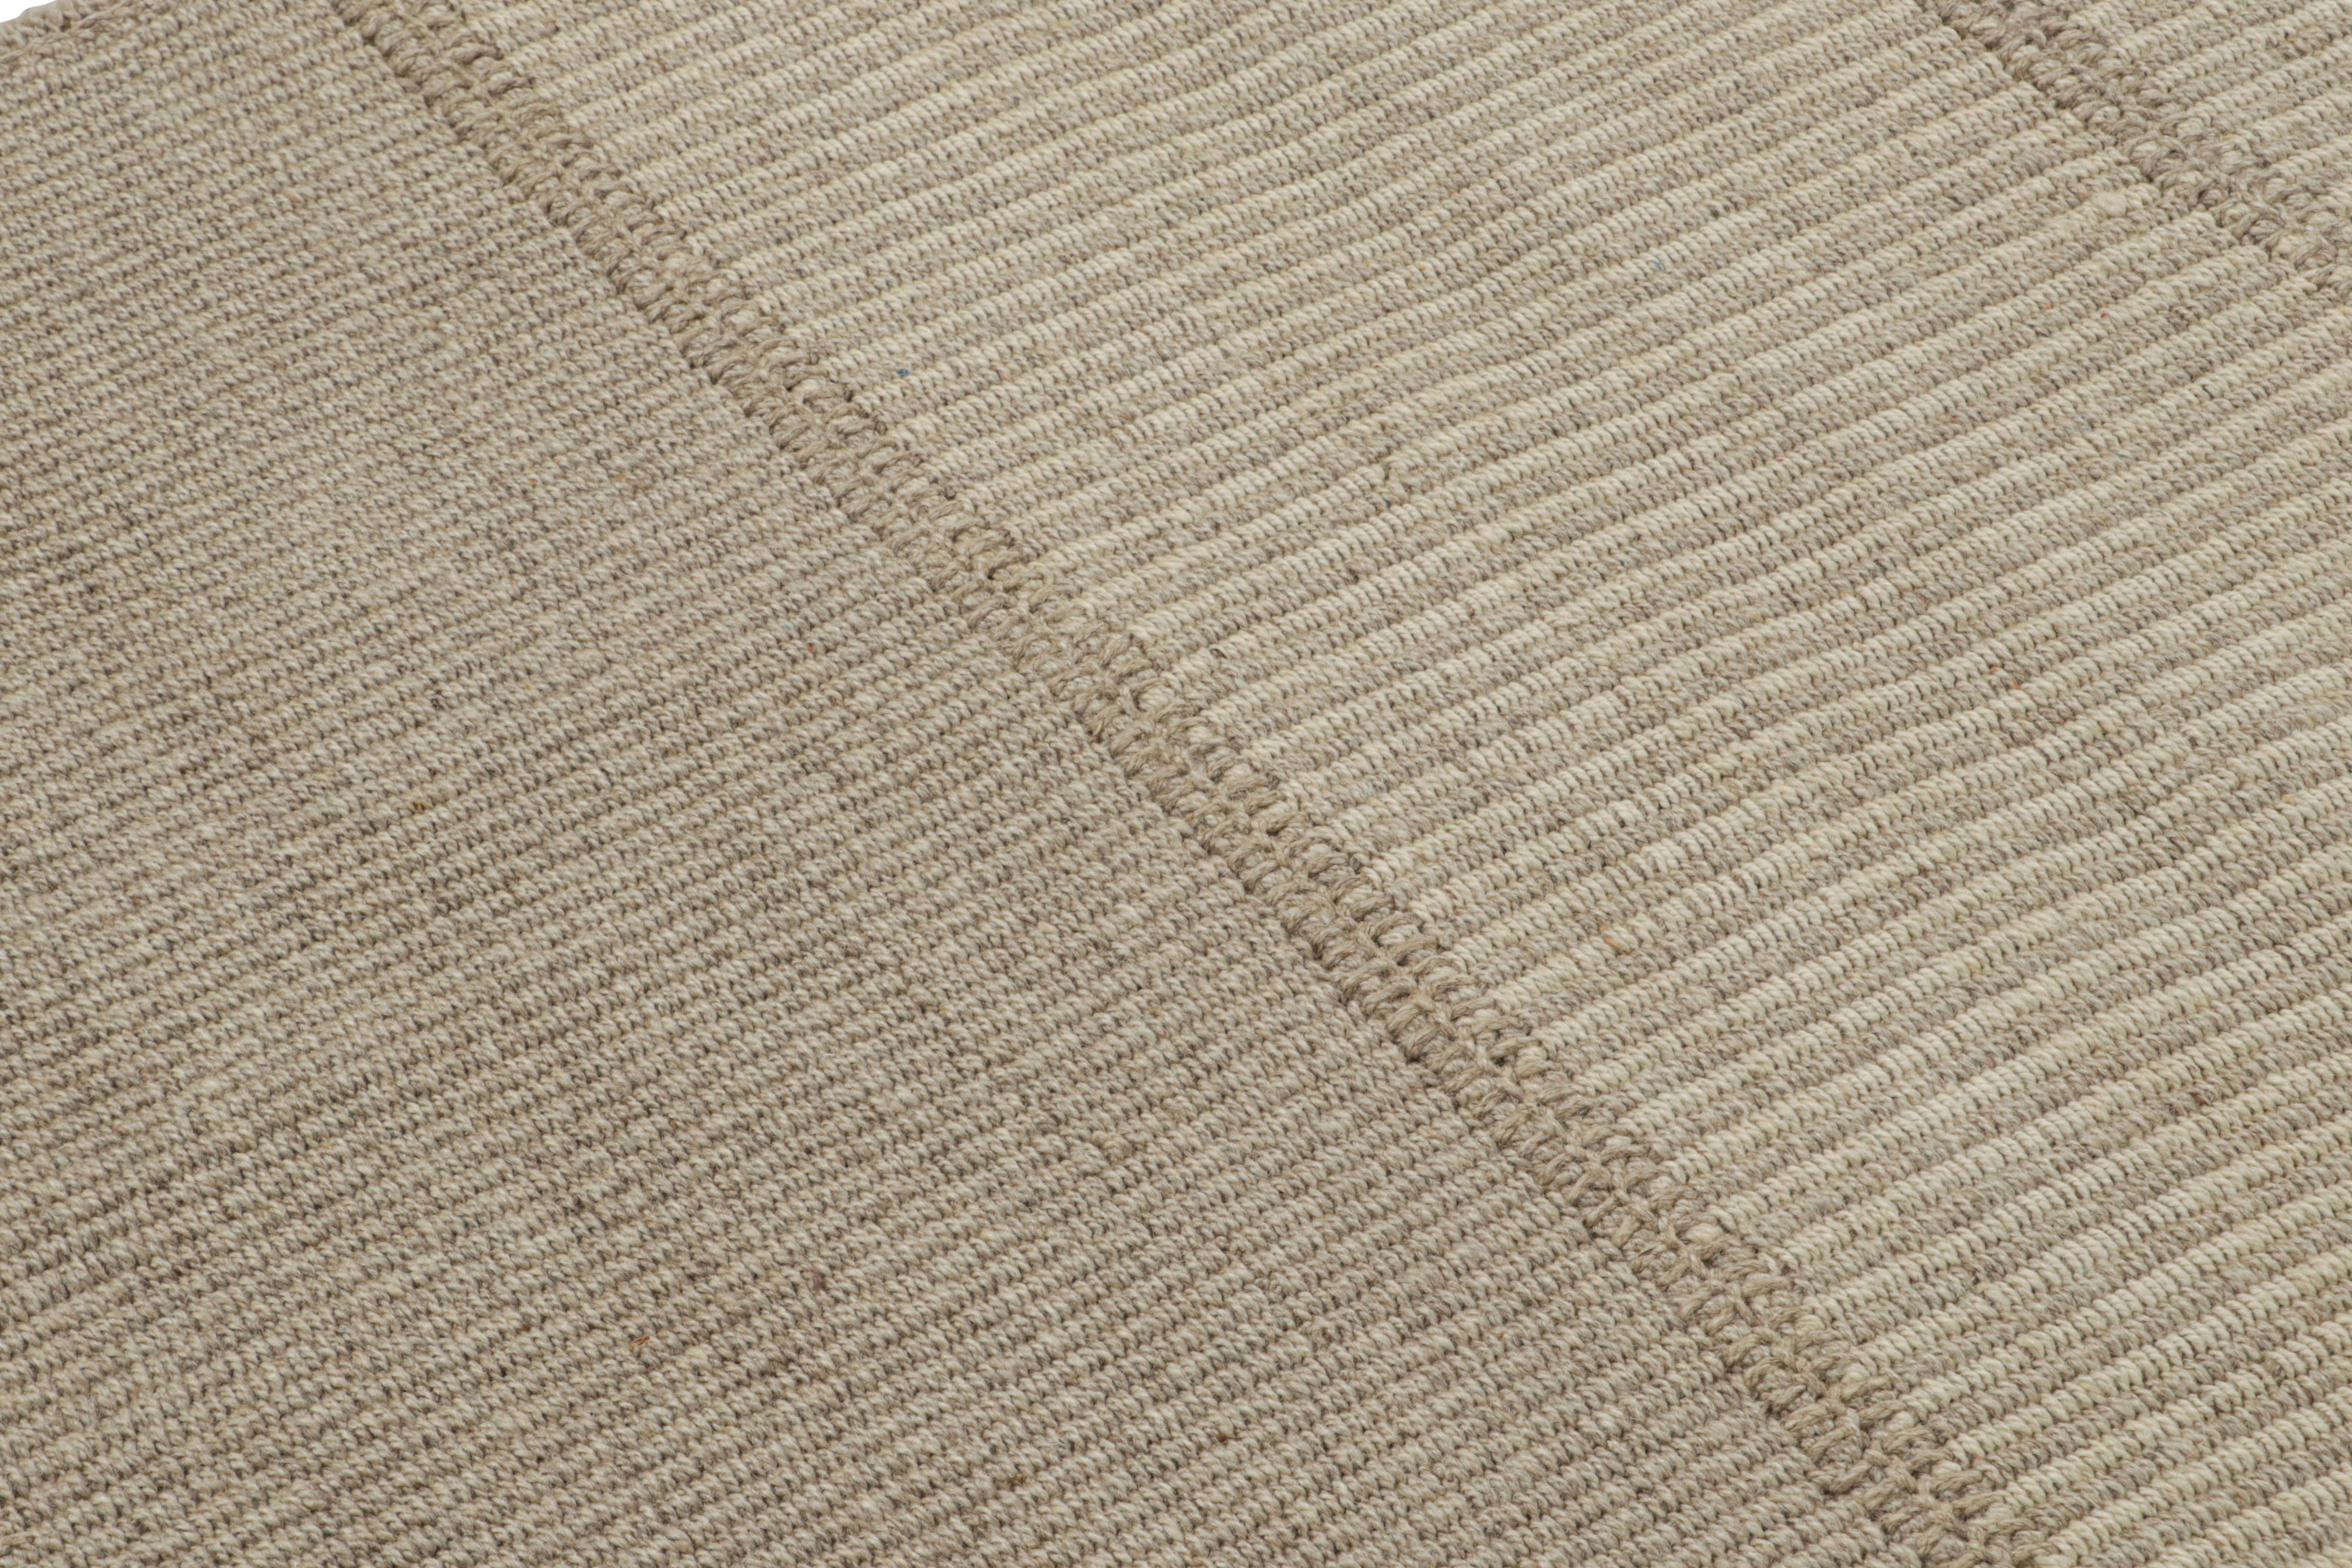 Hand-Knotted Rug & Kilim’s Contemporary Kilim with Light Beige-Brown Textural Stripes  For Sale